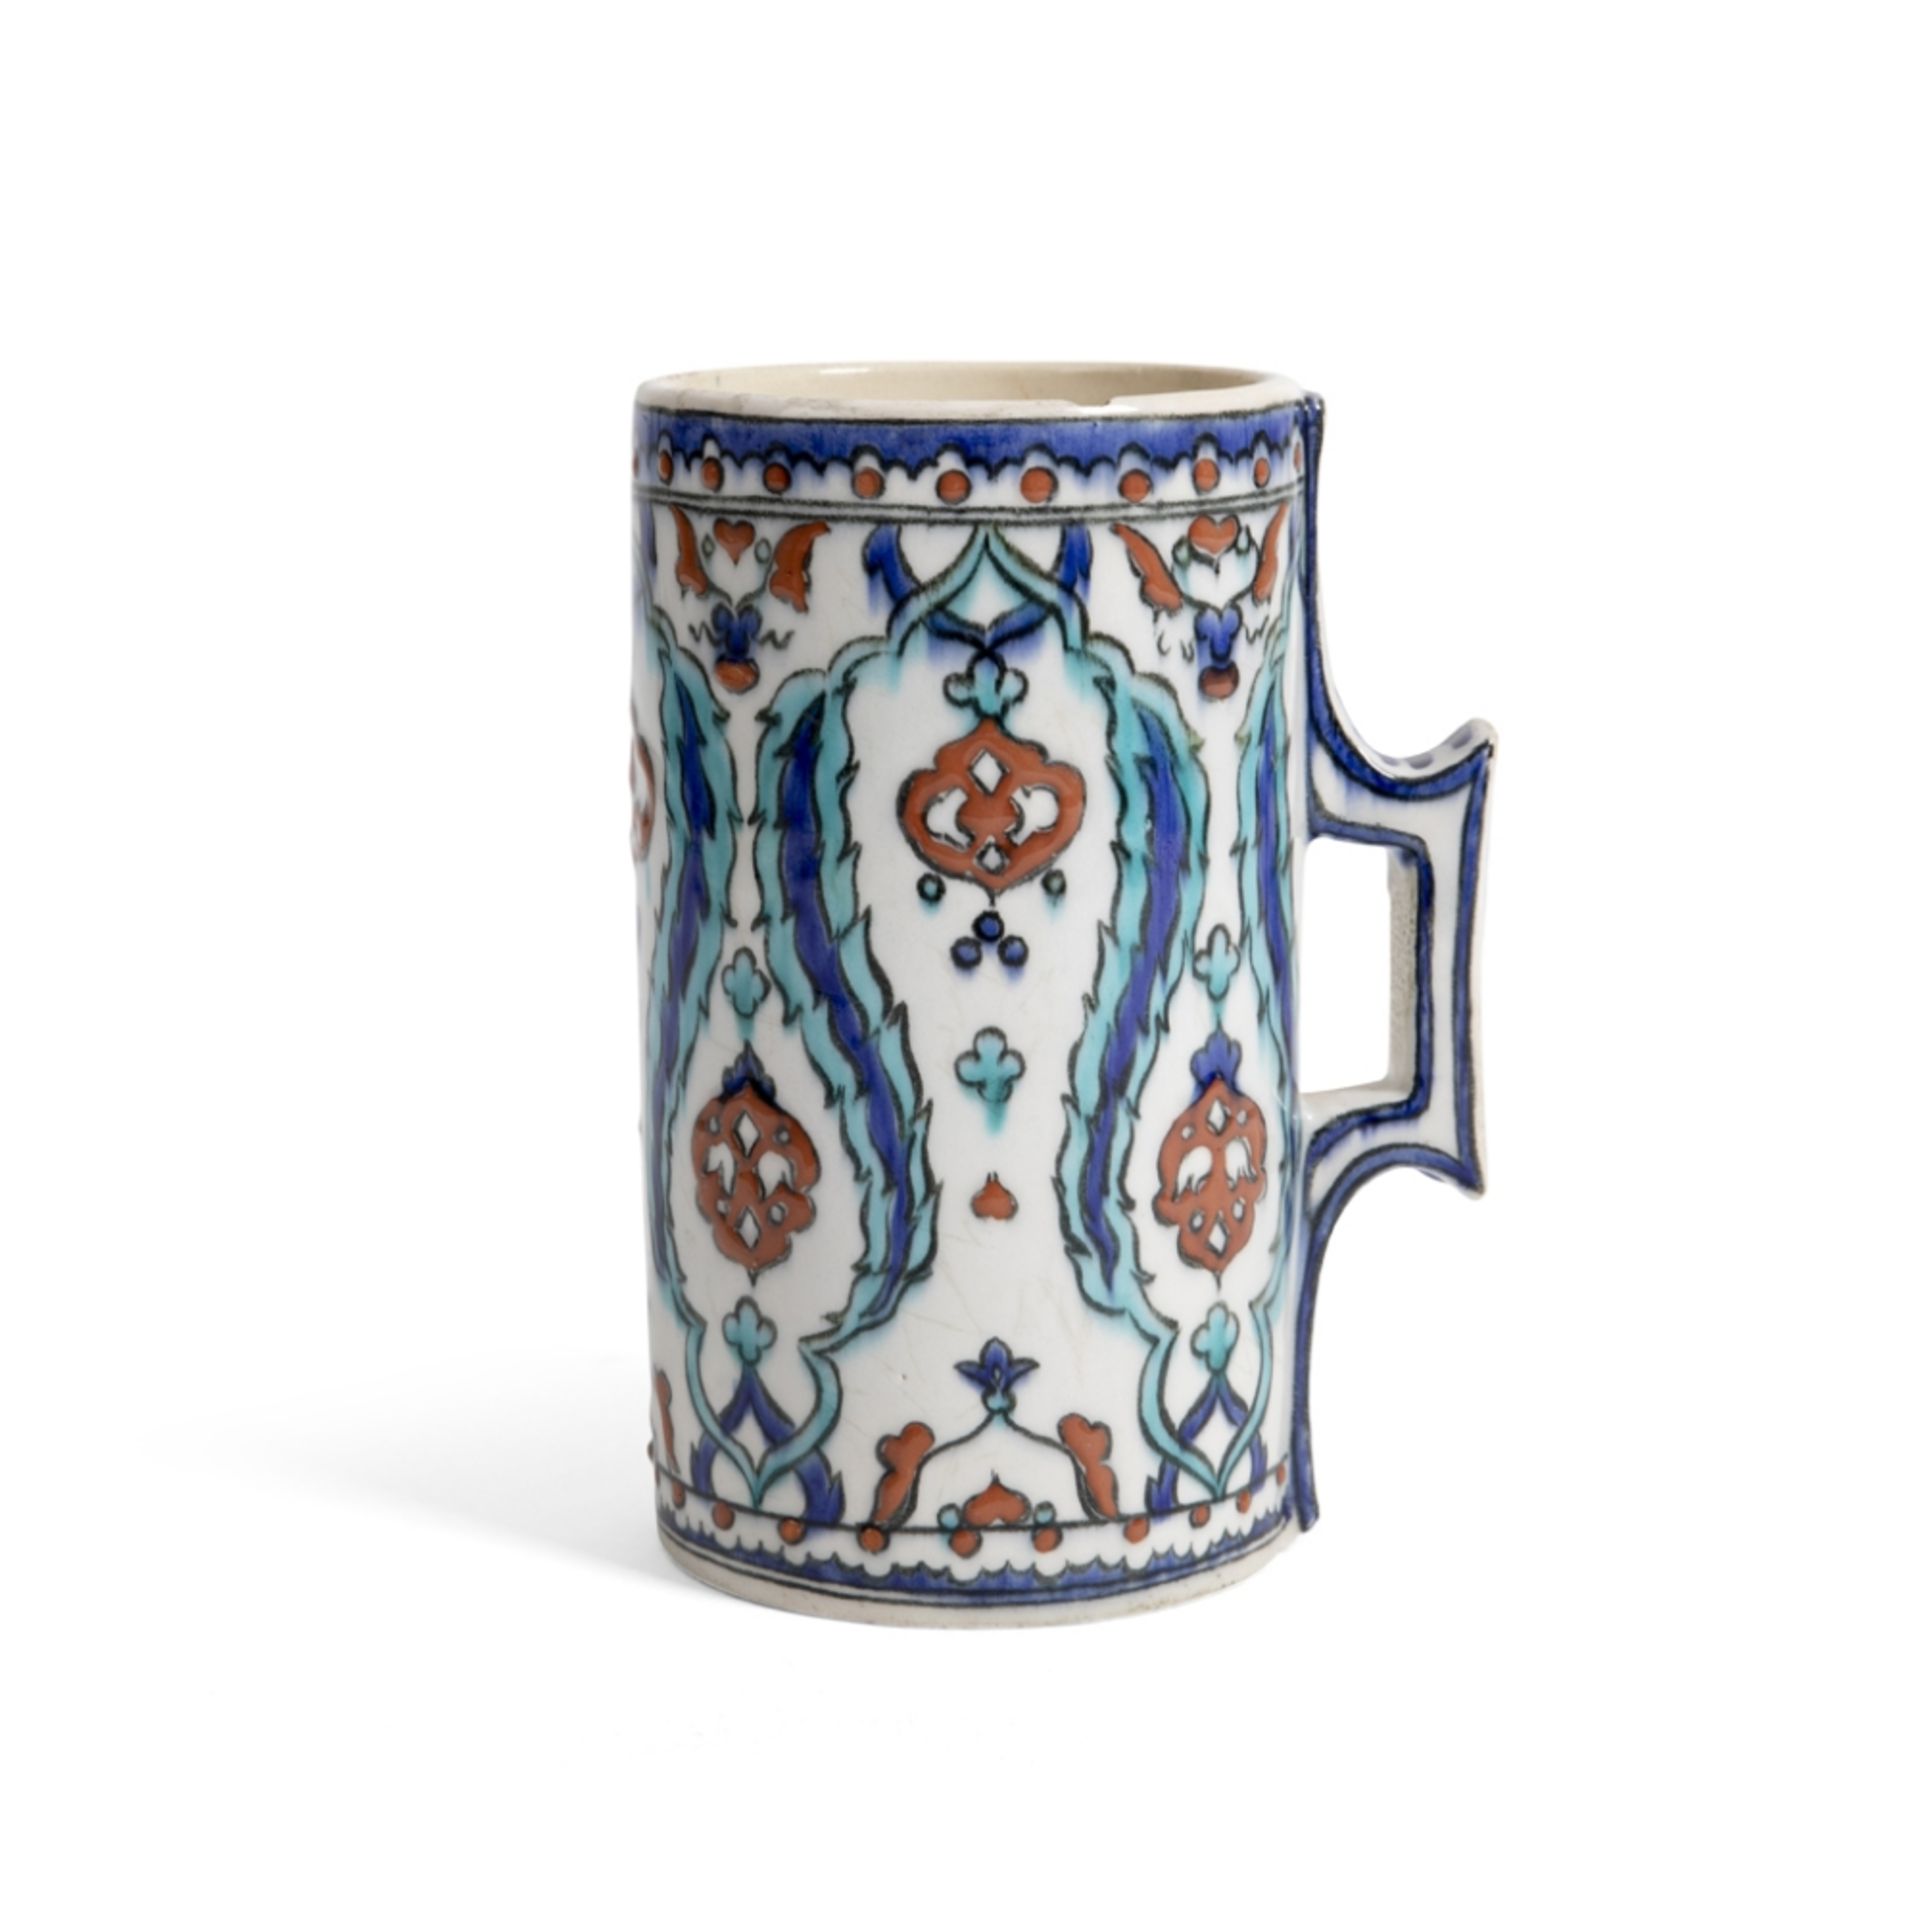 SAMSON IZNIK-STYLE POTTERY JUG FRANCE, 19TH CENTURY decorated with saz leaves and rosettes, marker's